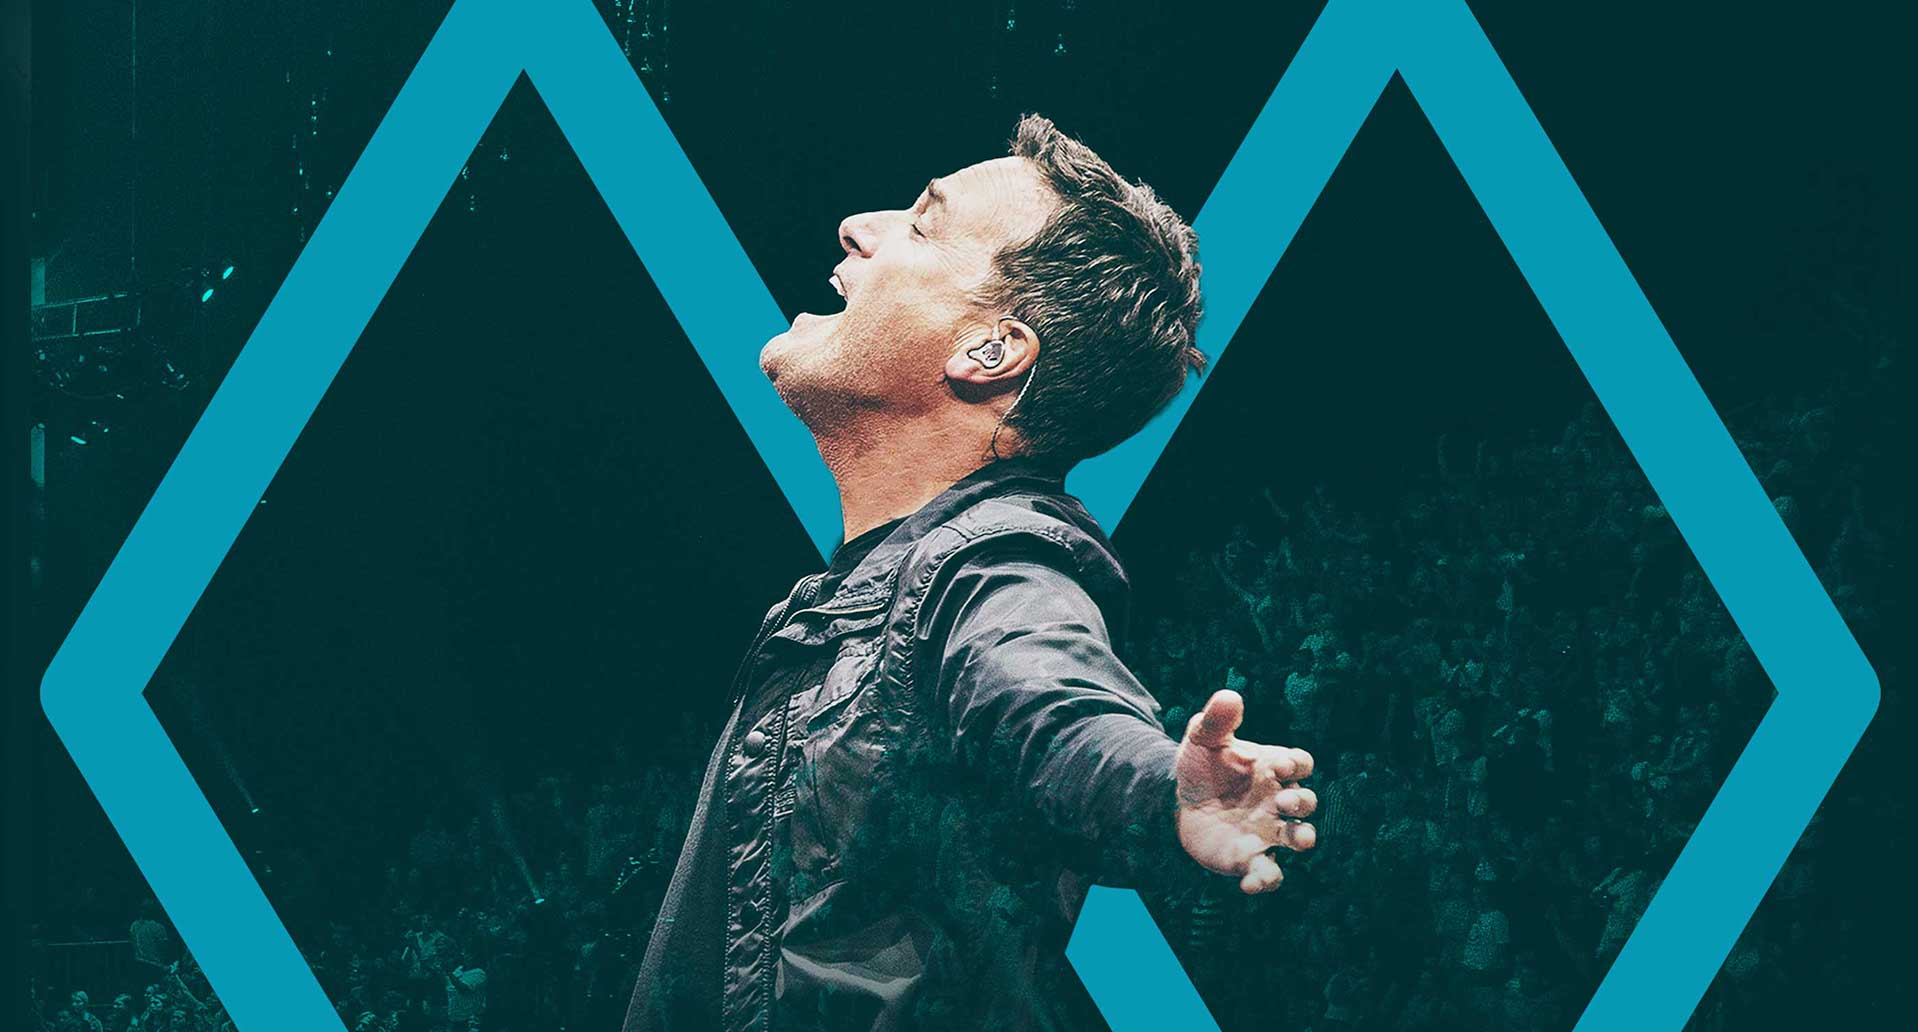 Mike w. Michael w.. Michael w. Smith: Worship Forever | Amy Grant, Tauren wells, and Matt Redman. TJ Stafford, Michael Smith & Nineoneone. Effects Mike w.